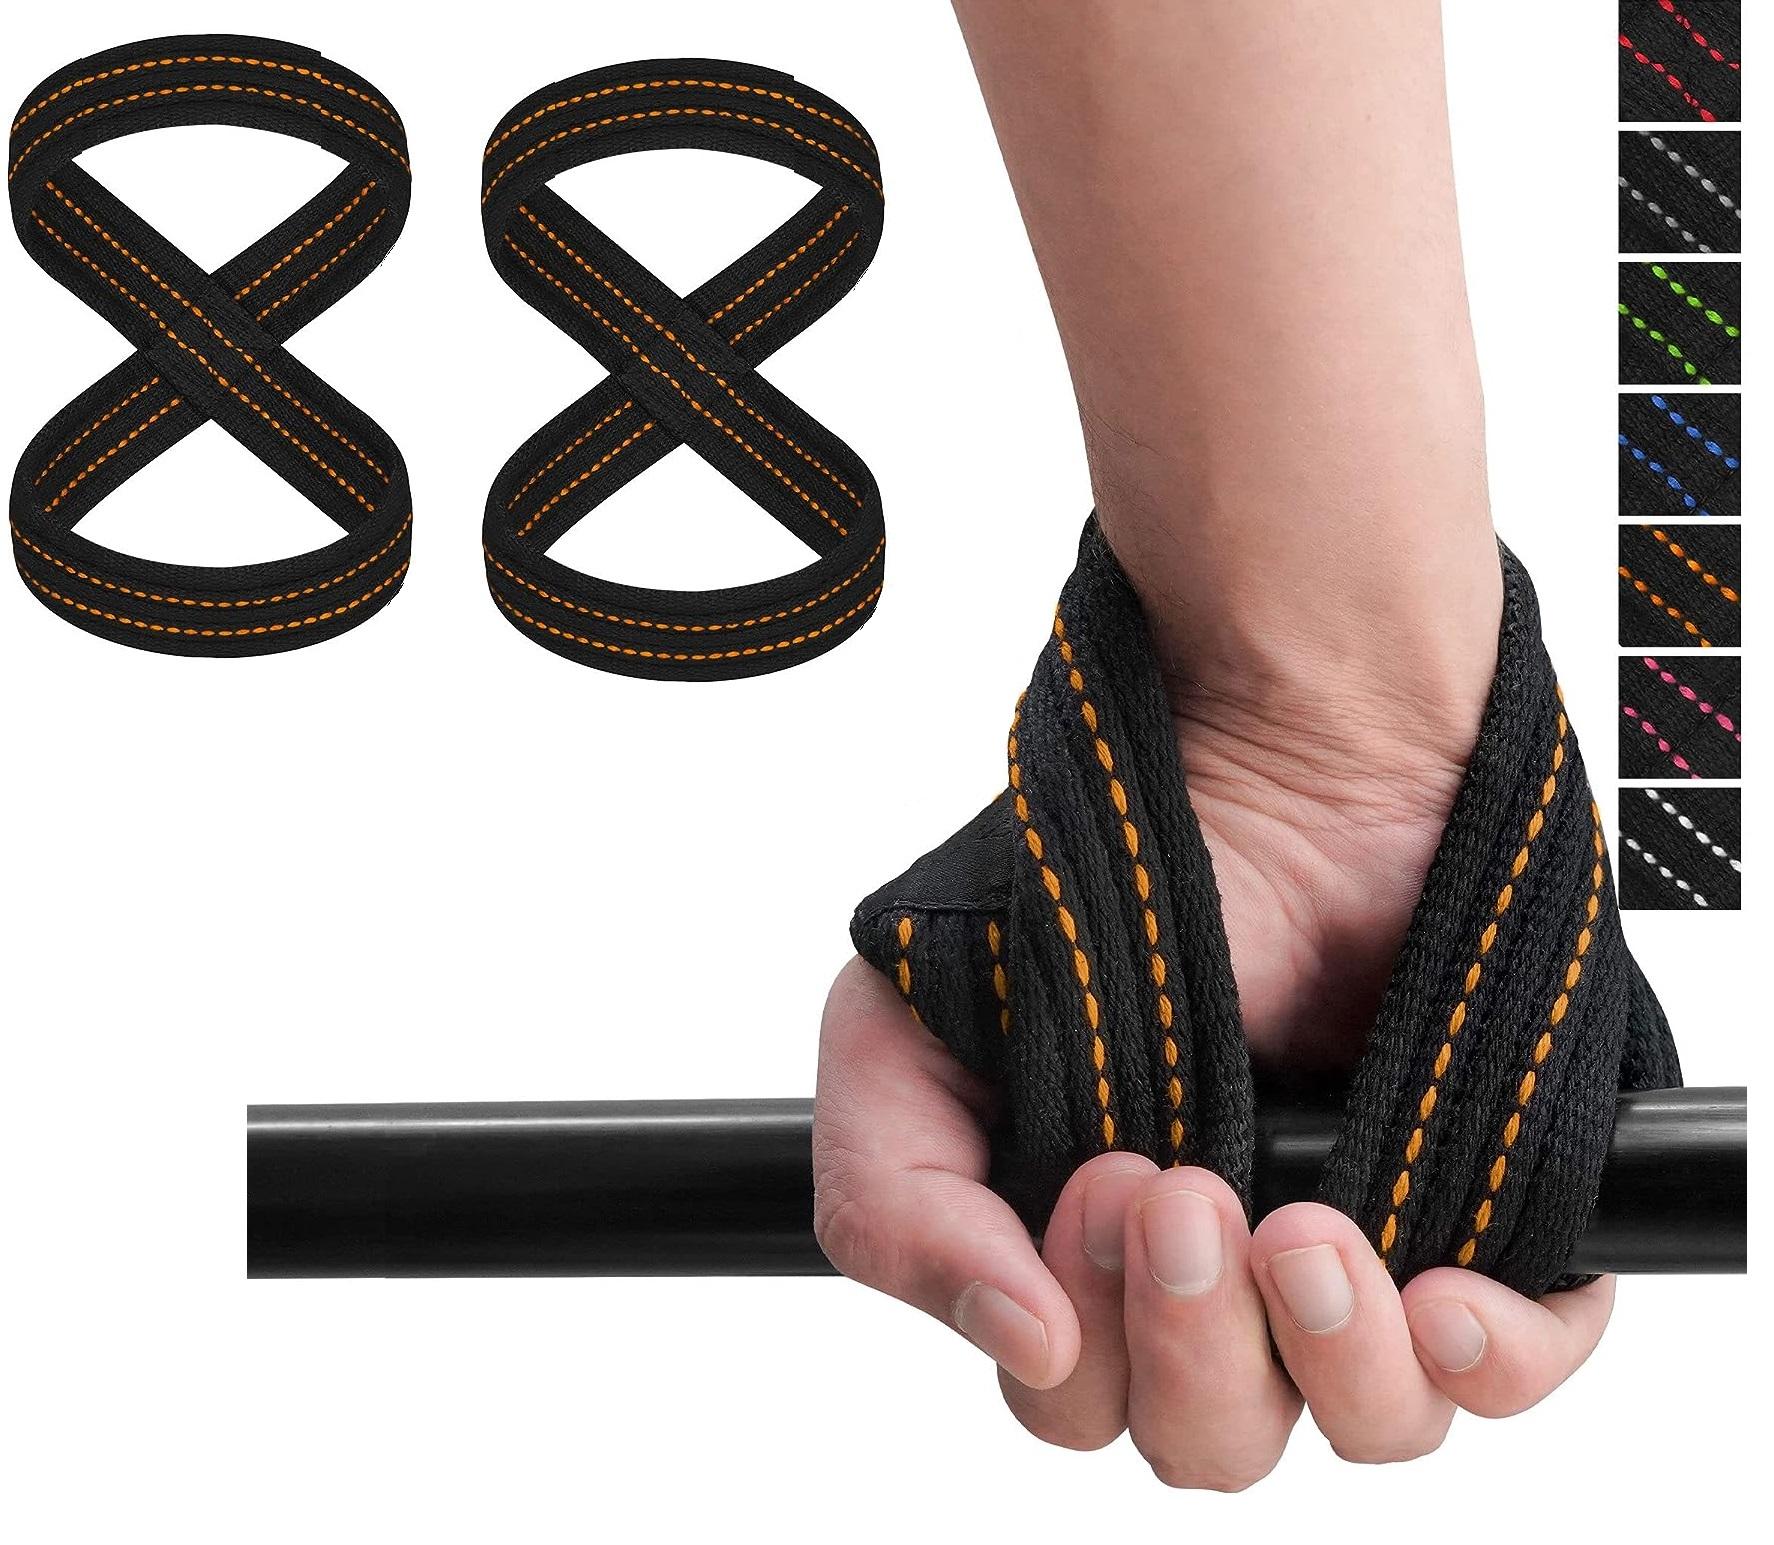 Weight Lifting Straps Figure 8, Anti Slip Strap with cuffs wrist Support for Gym Workout Deadlift Powerlifting Bodybuilding Weightlifting, Fitness Strength Training, Hand Bar Grip for Men